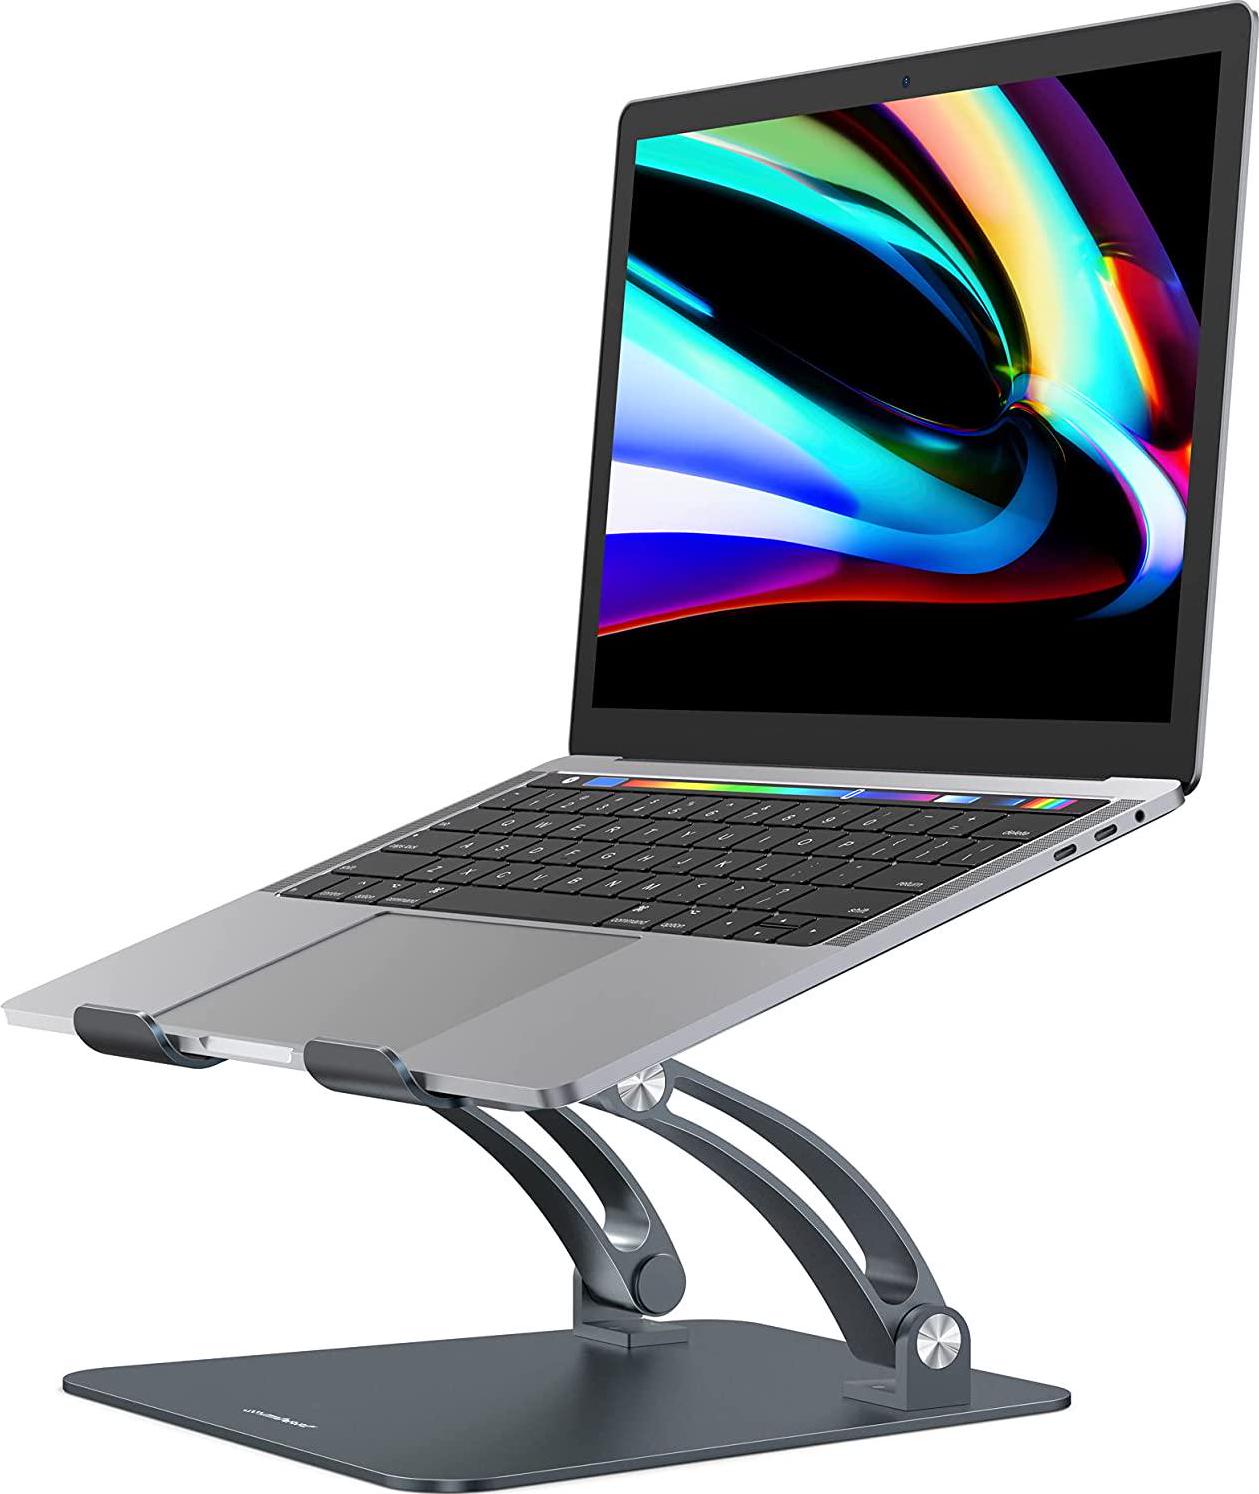 mbeat, mbeat Stage S6 Adjustable Elevated Laptop and MacBook Ergonomic Stand, Laptop Riser and Workstation in Space Grey Aluminium Design, Supports up to 17 inch Laptop